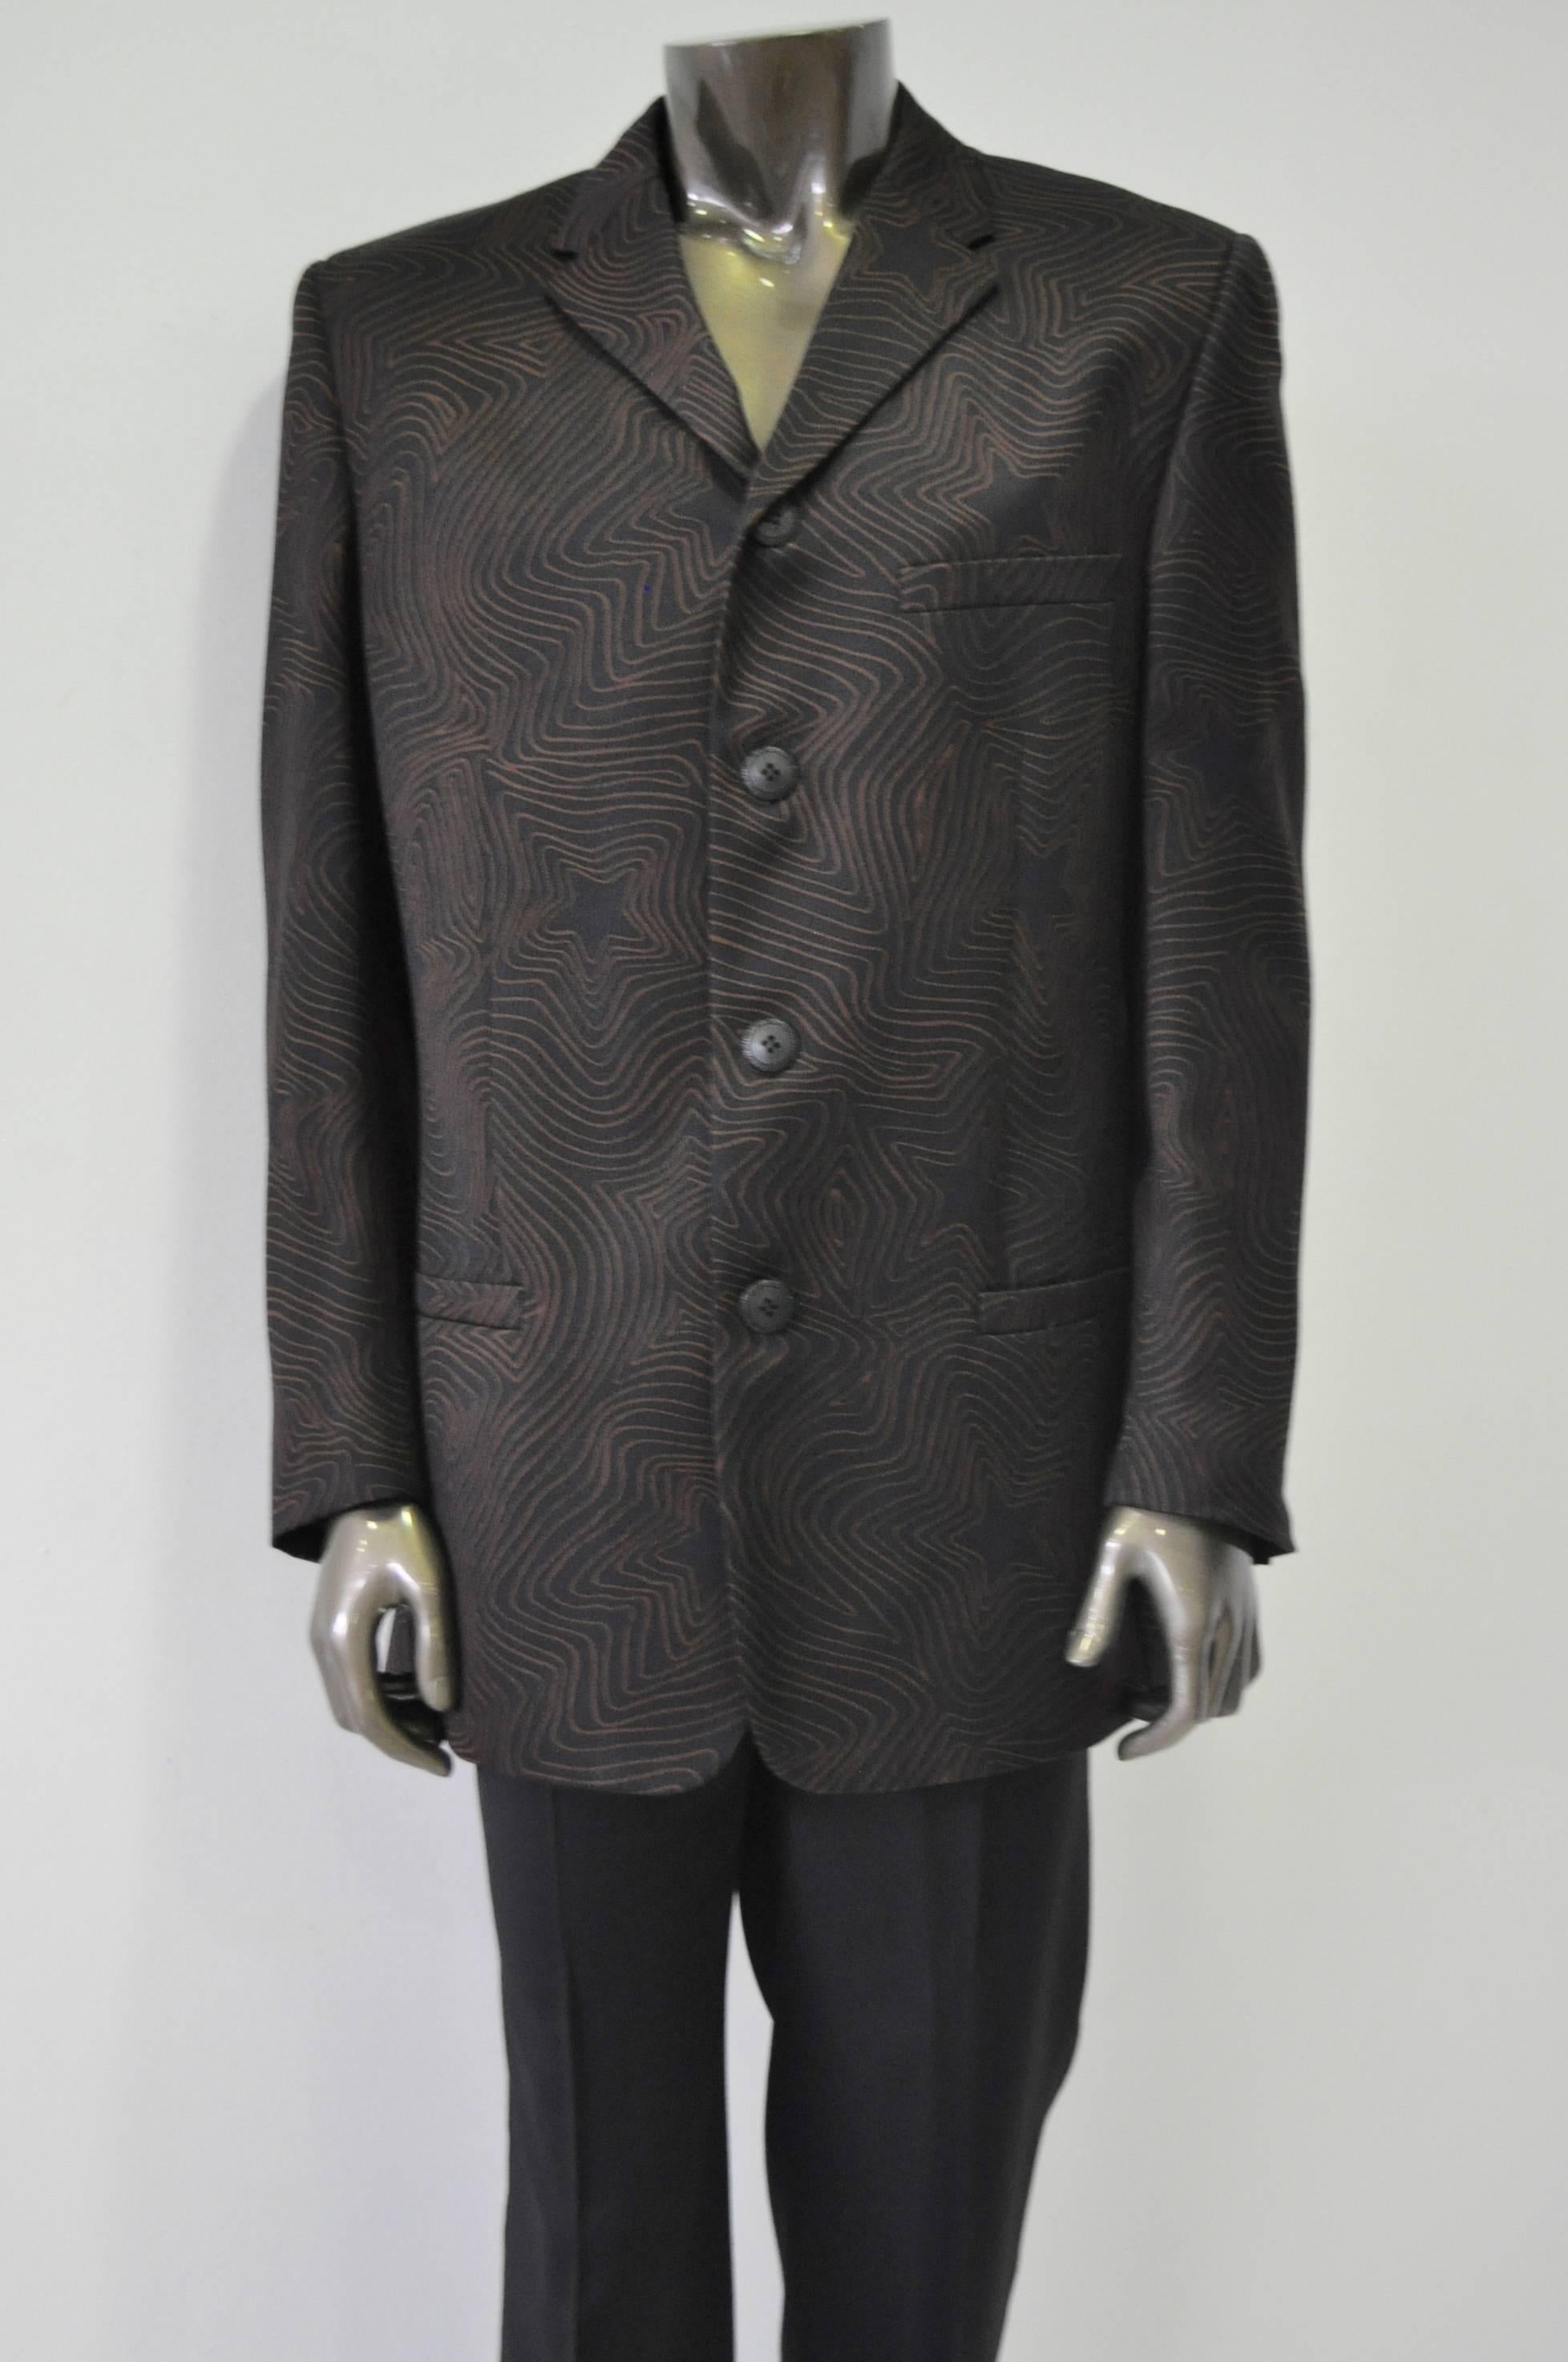 Rare and Exceptional Star Pattern Men's Wool Jacket Featuring Fine 